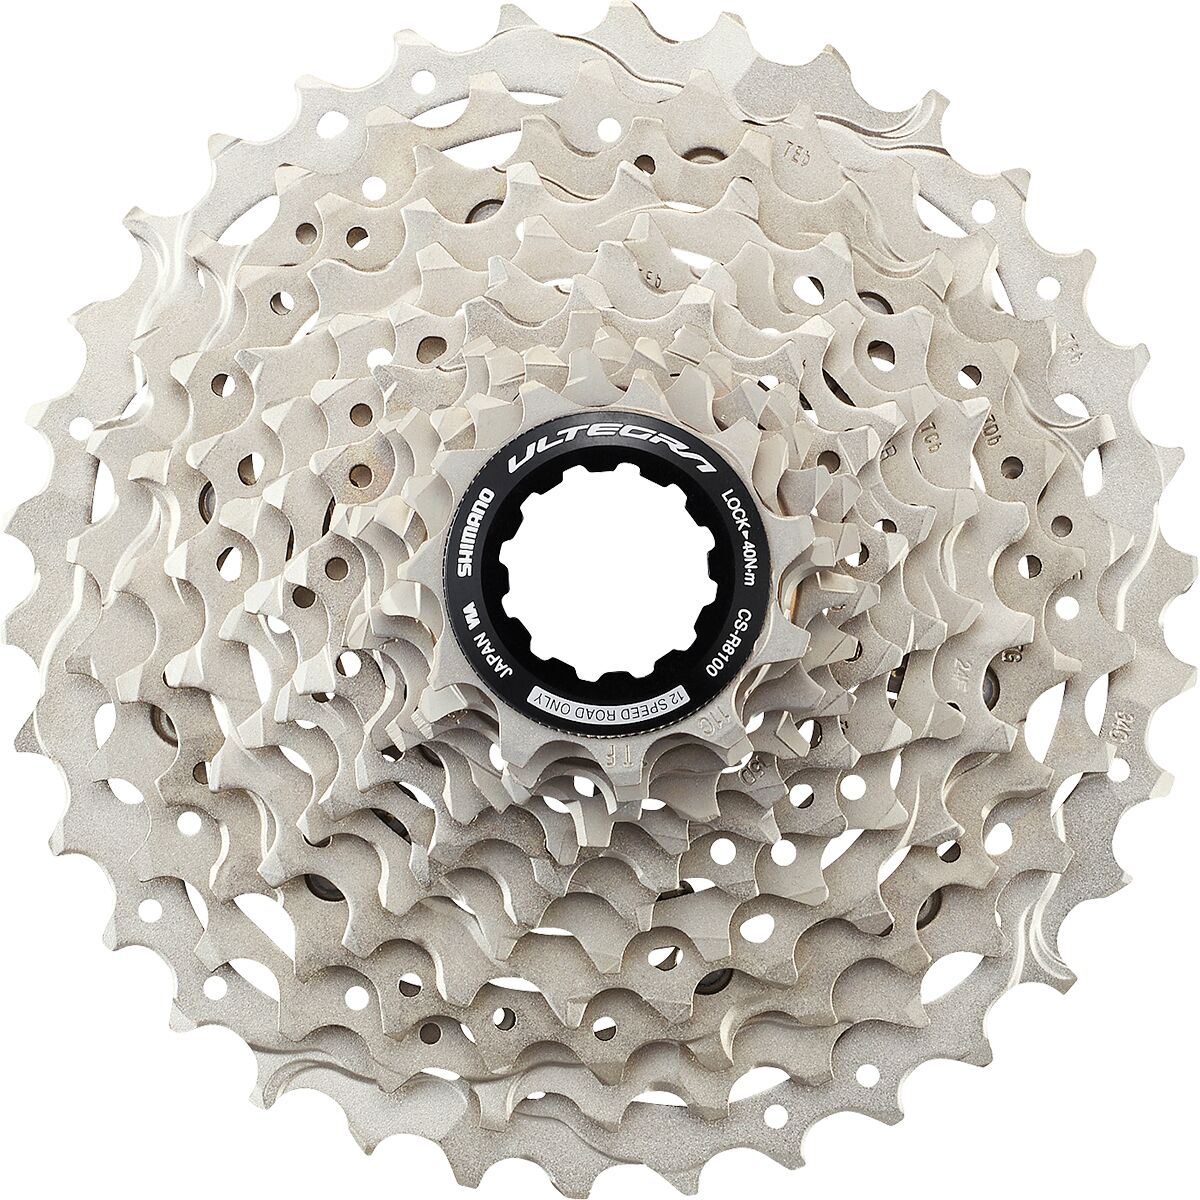 Photos - Bicycle Parts Shimano Ultegra CS-R8100 12-Speed Cassette 